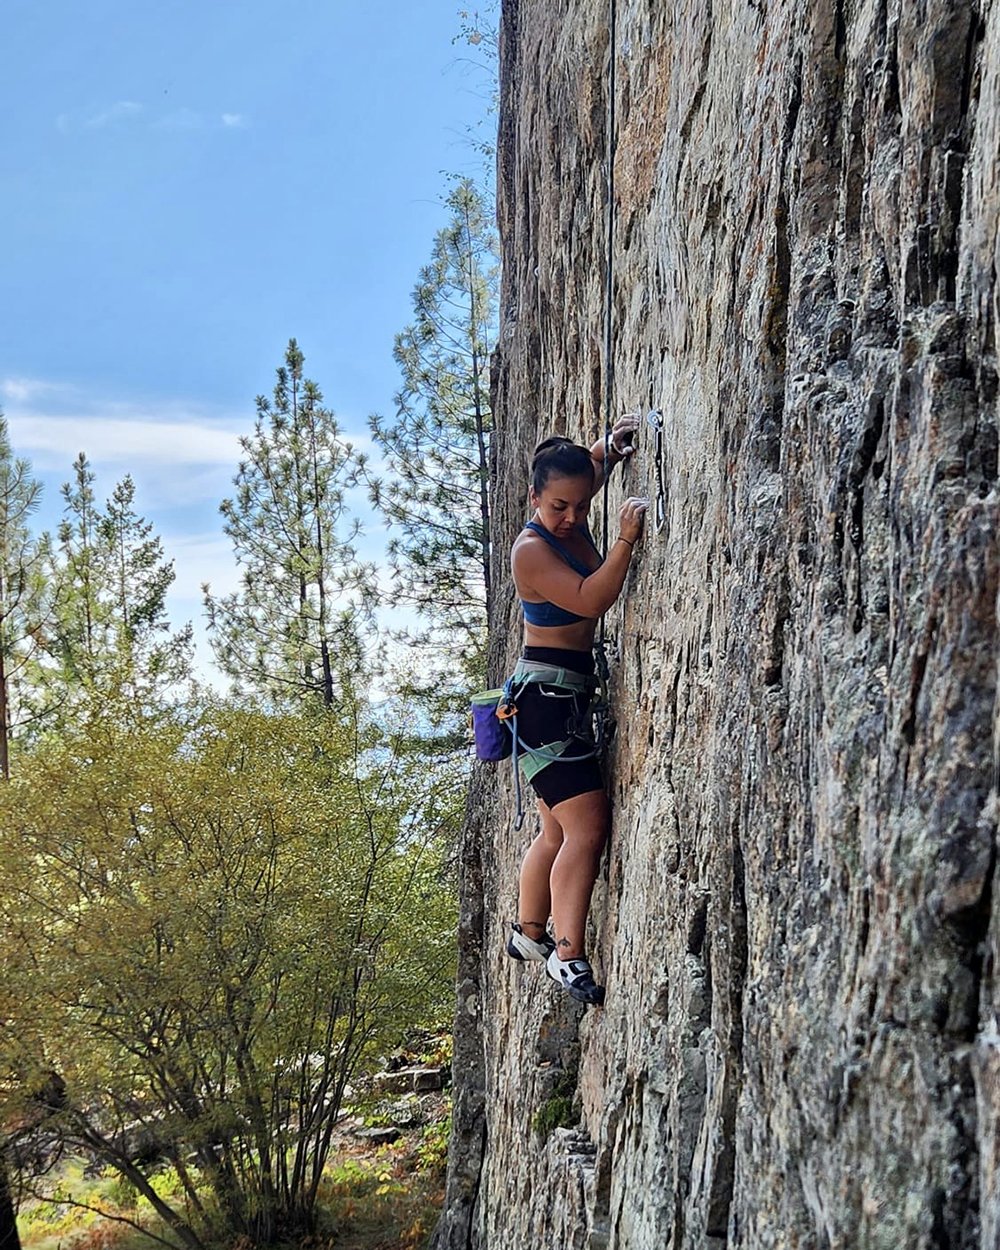  Me pushing grades on top rope, attempting Colours of the Wind 5.11a on the Claim-it-All wall.  